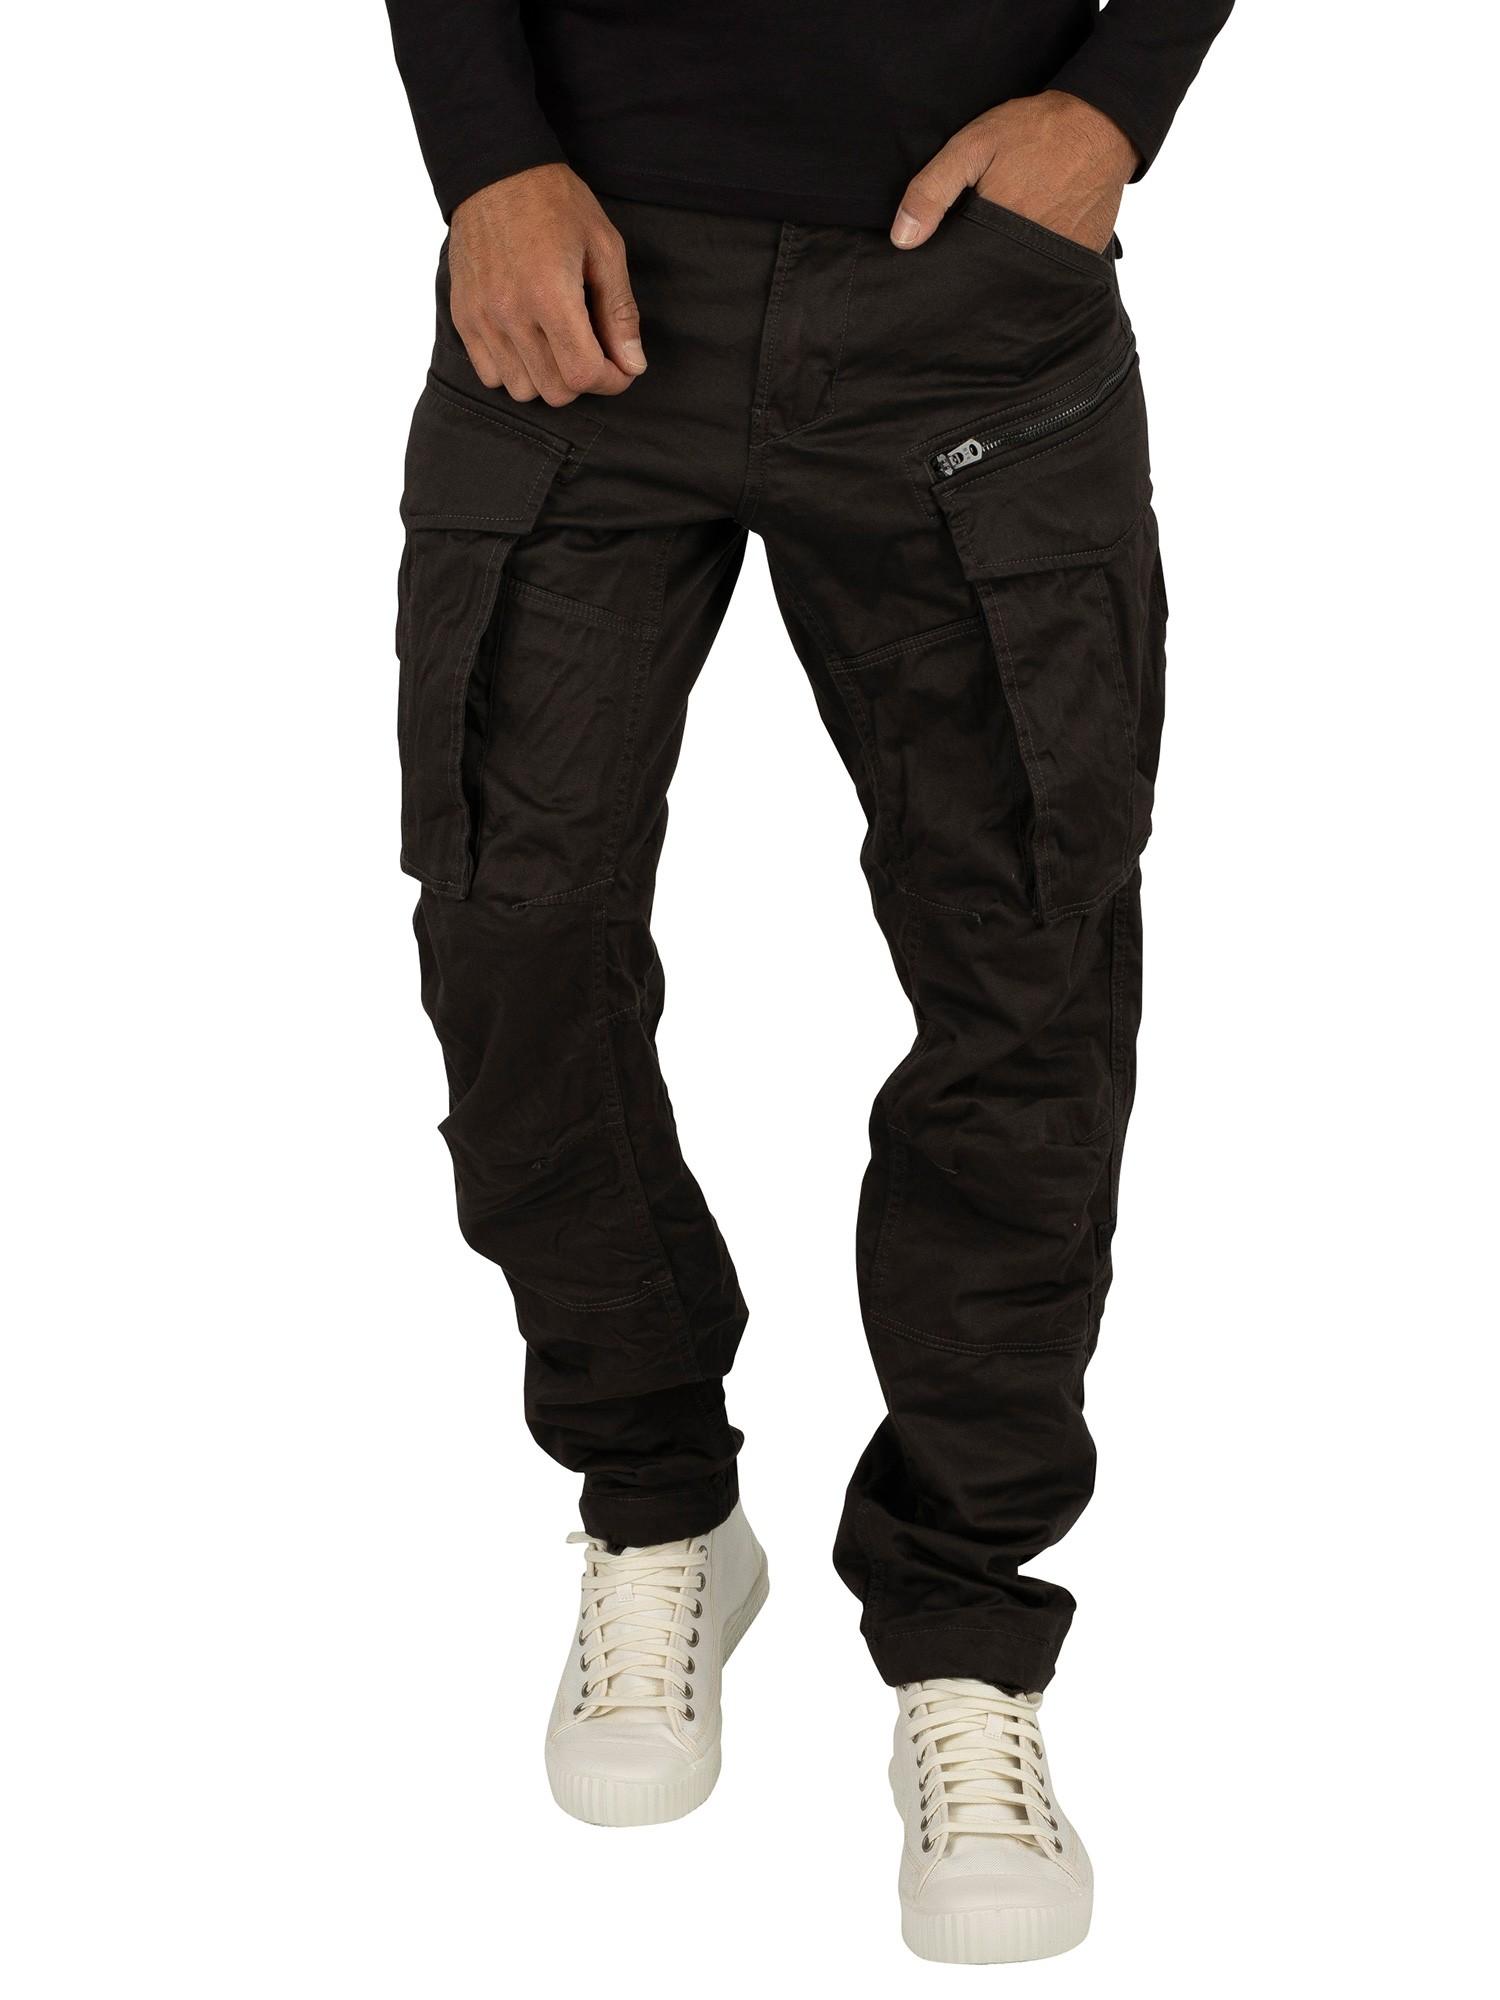 G-Star RAW Rovic Zip 3d Straight Tapered Cargos in Black for Men - Save 47%  | Lyst